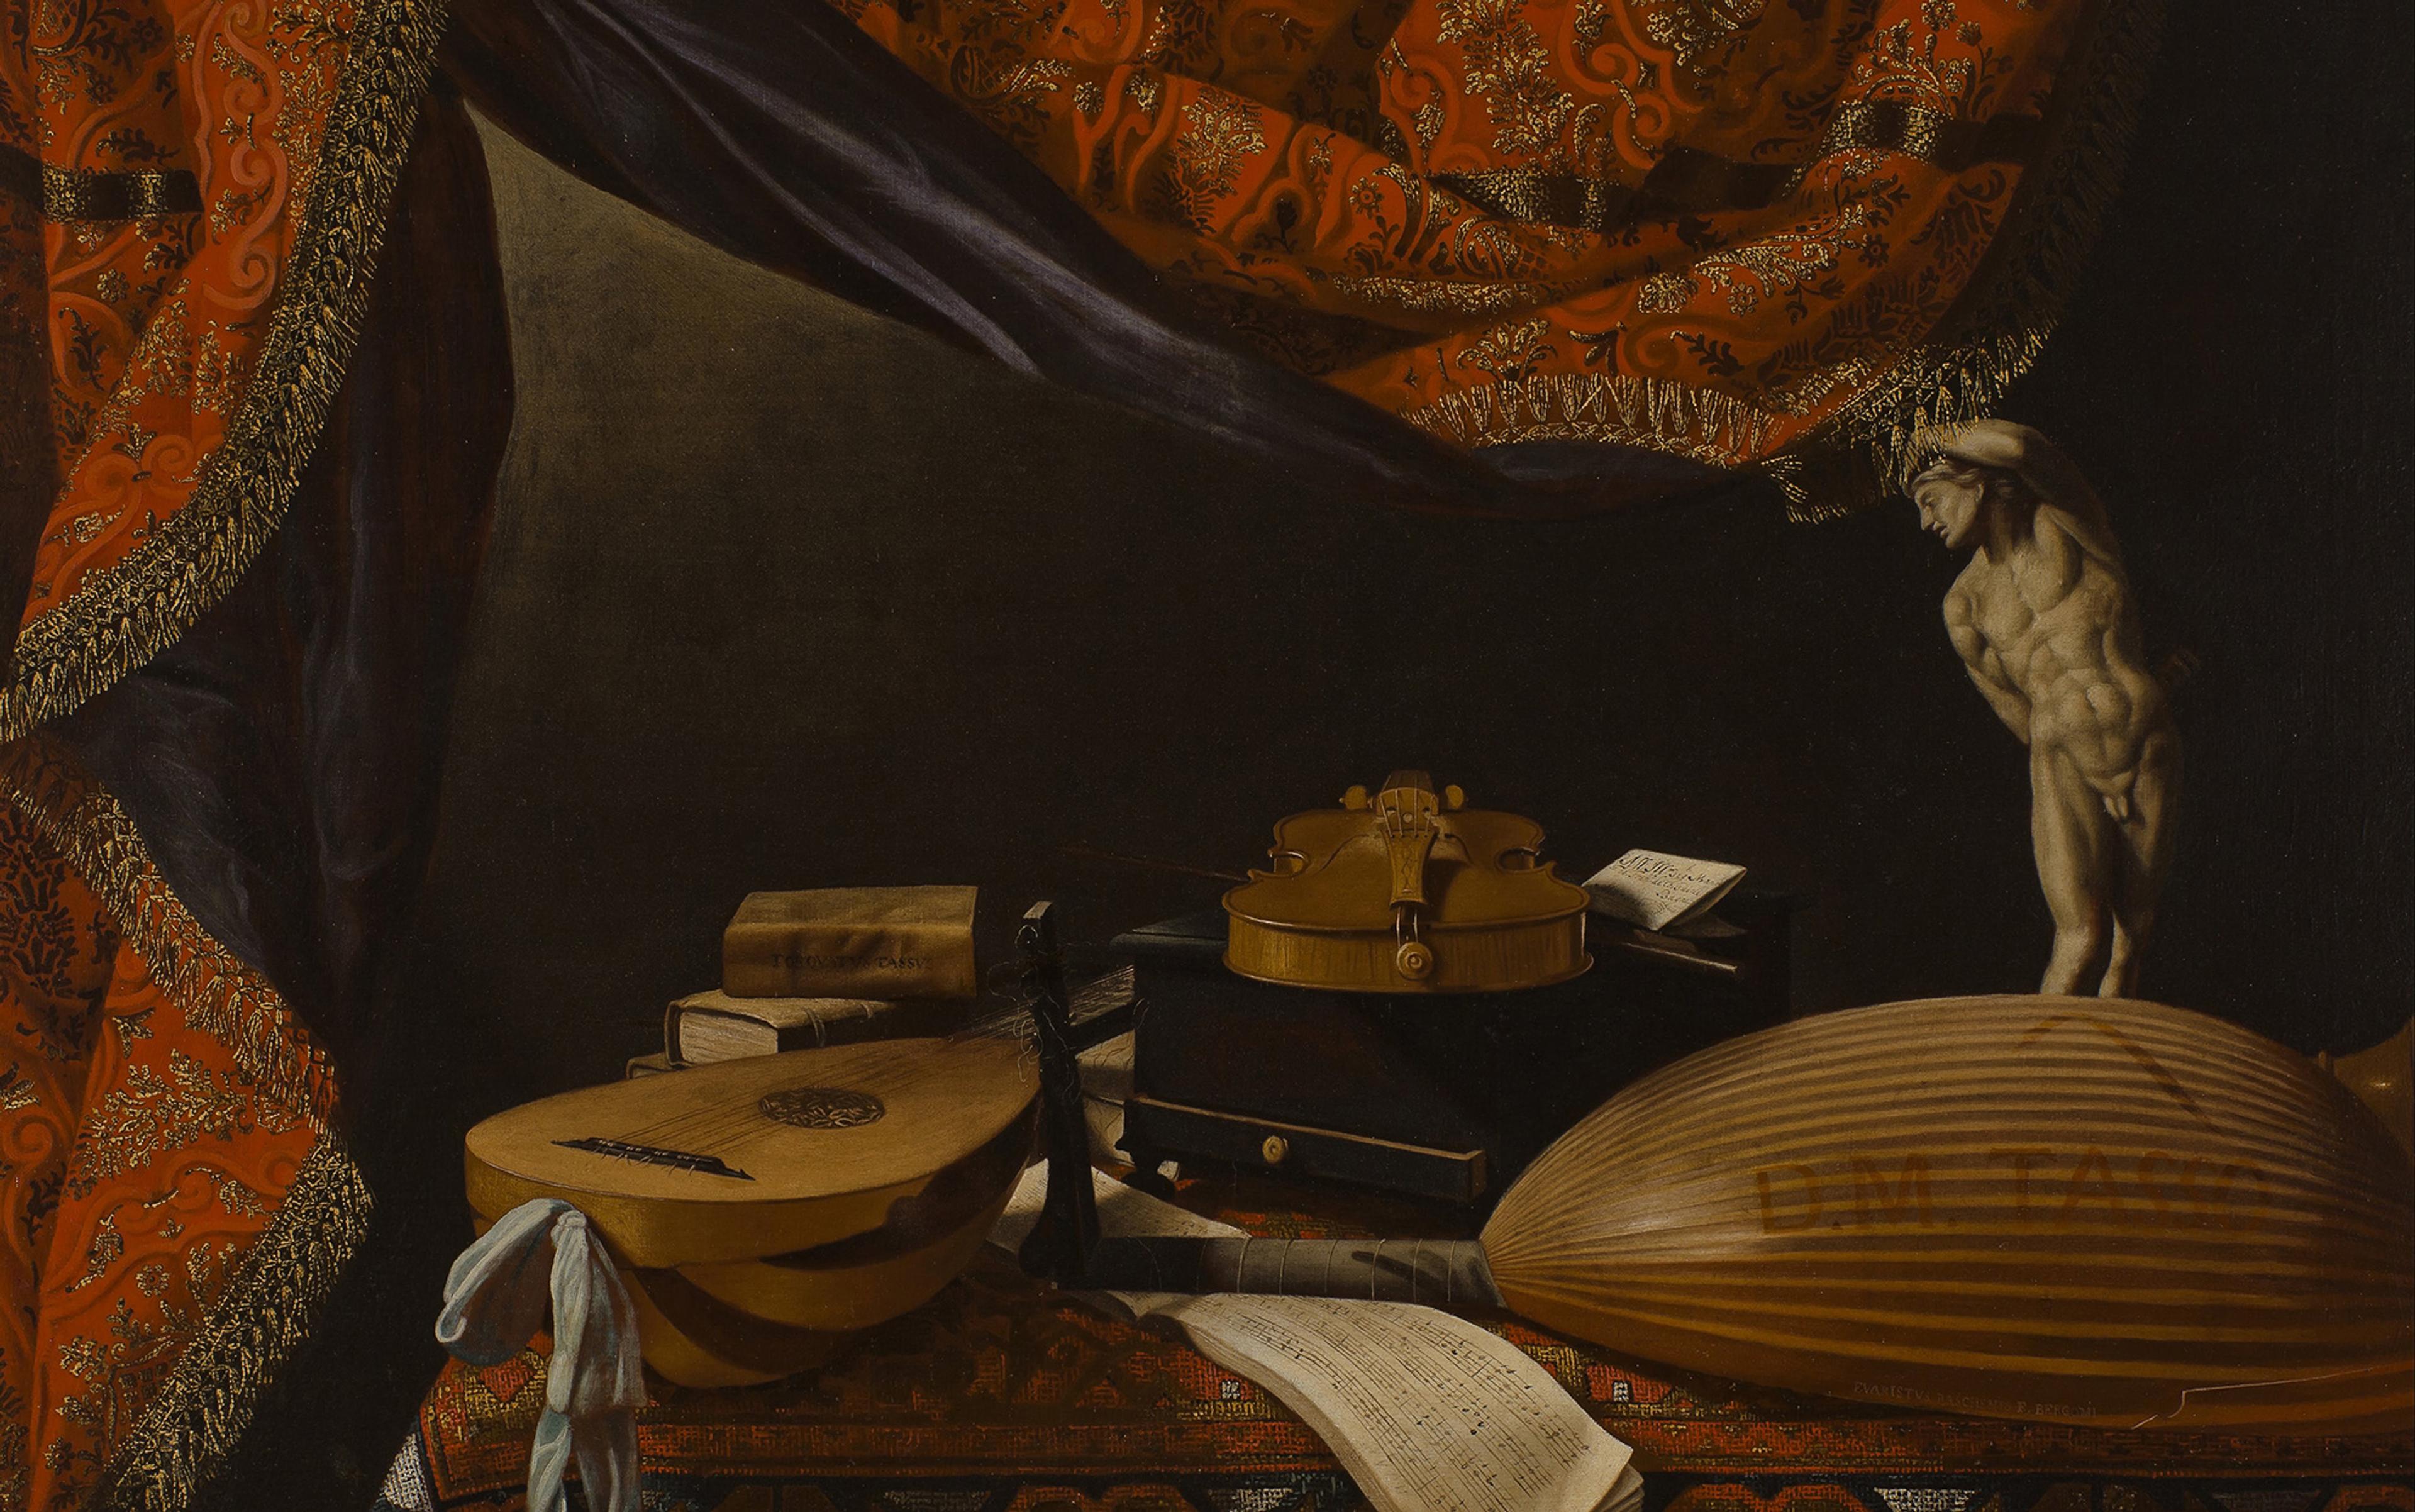 Still life with musical instruments, sheet music, books, and a small statue on a table draped with a richly patterned red and gold curtain.